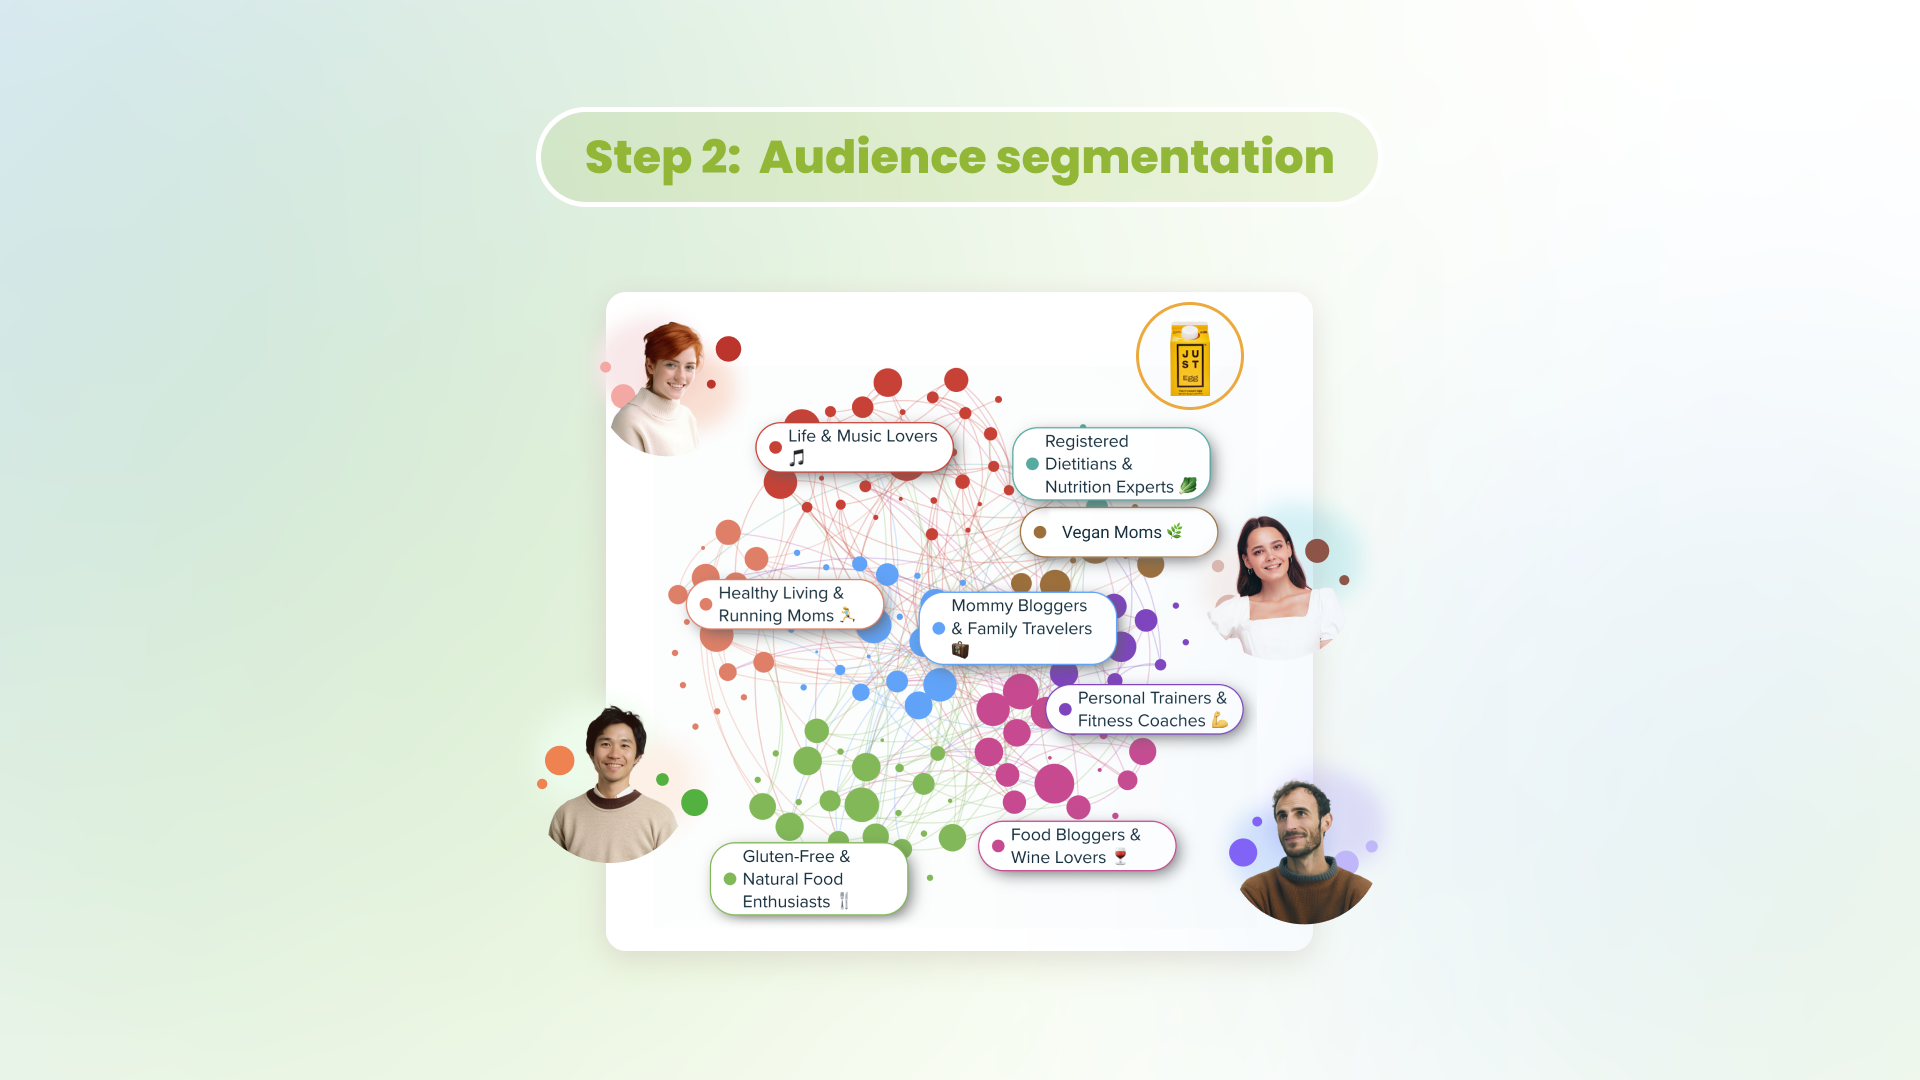 The agency roadmap to success - audience segmentation